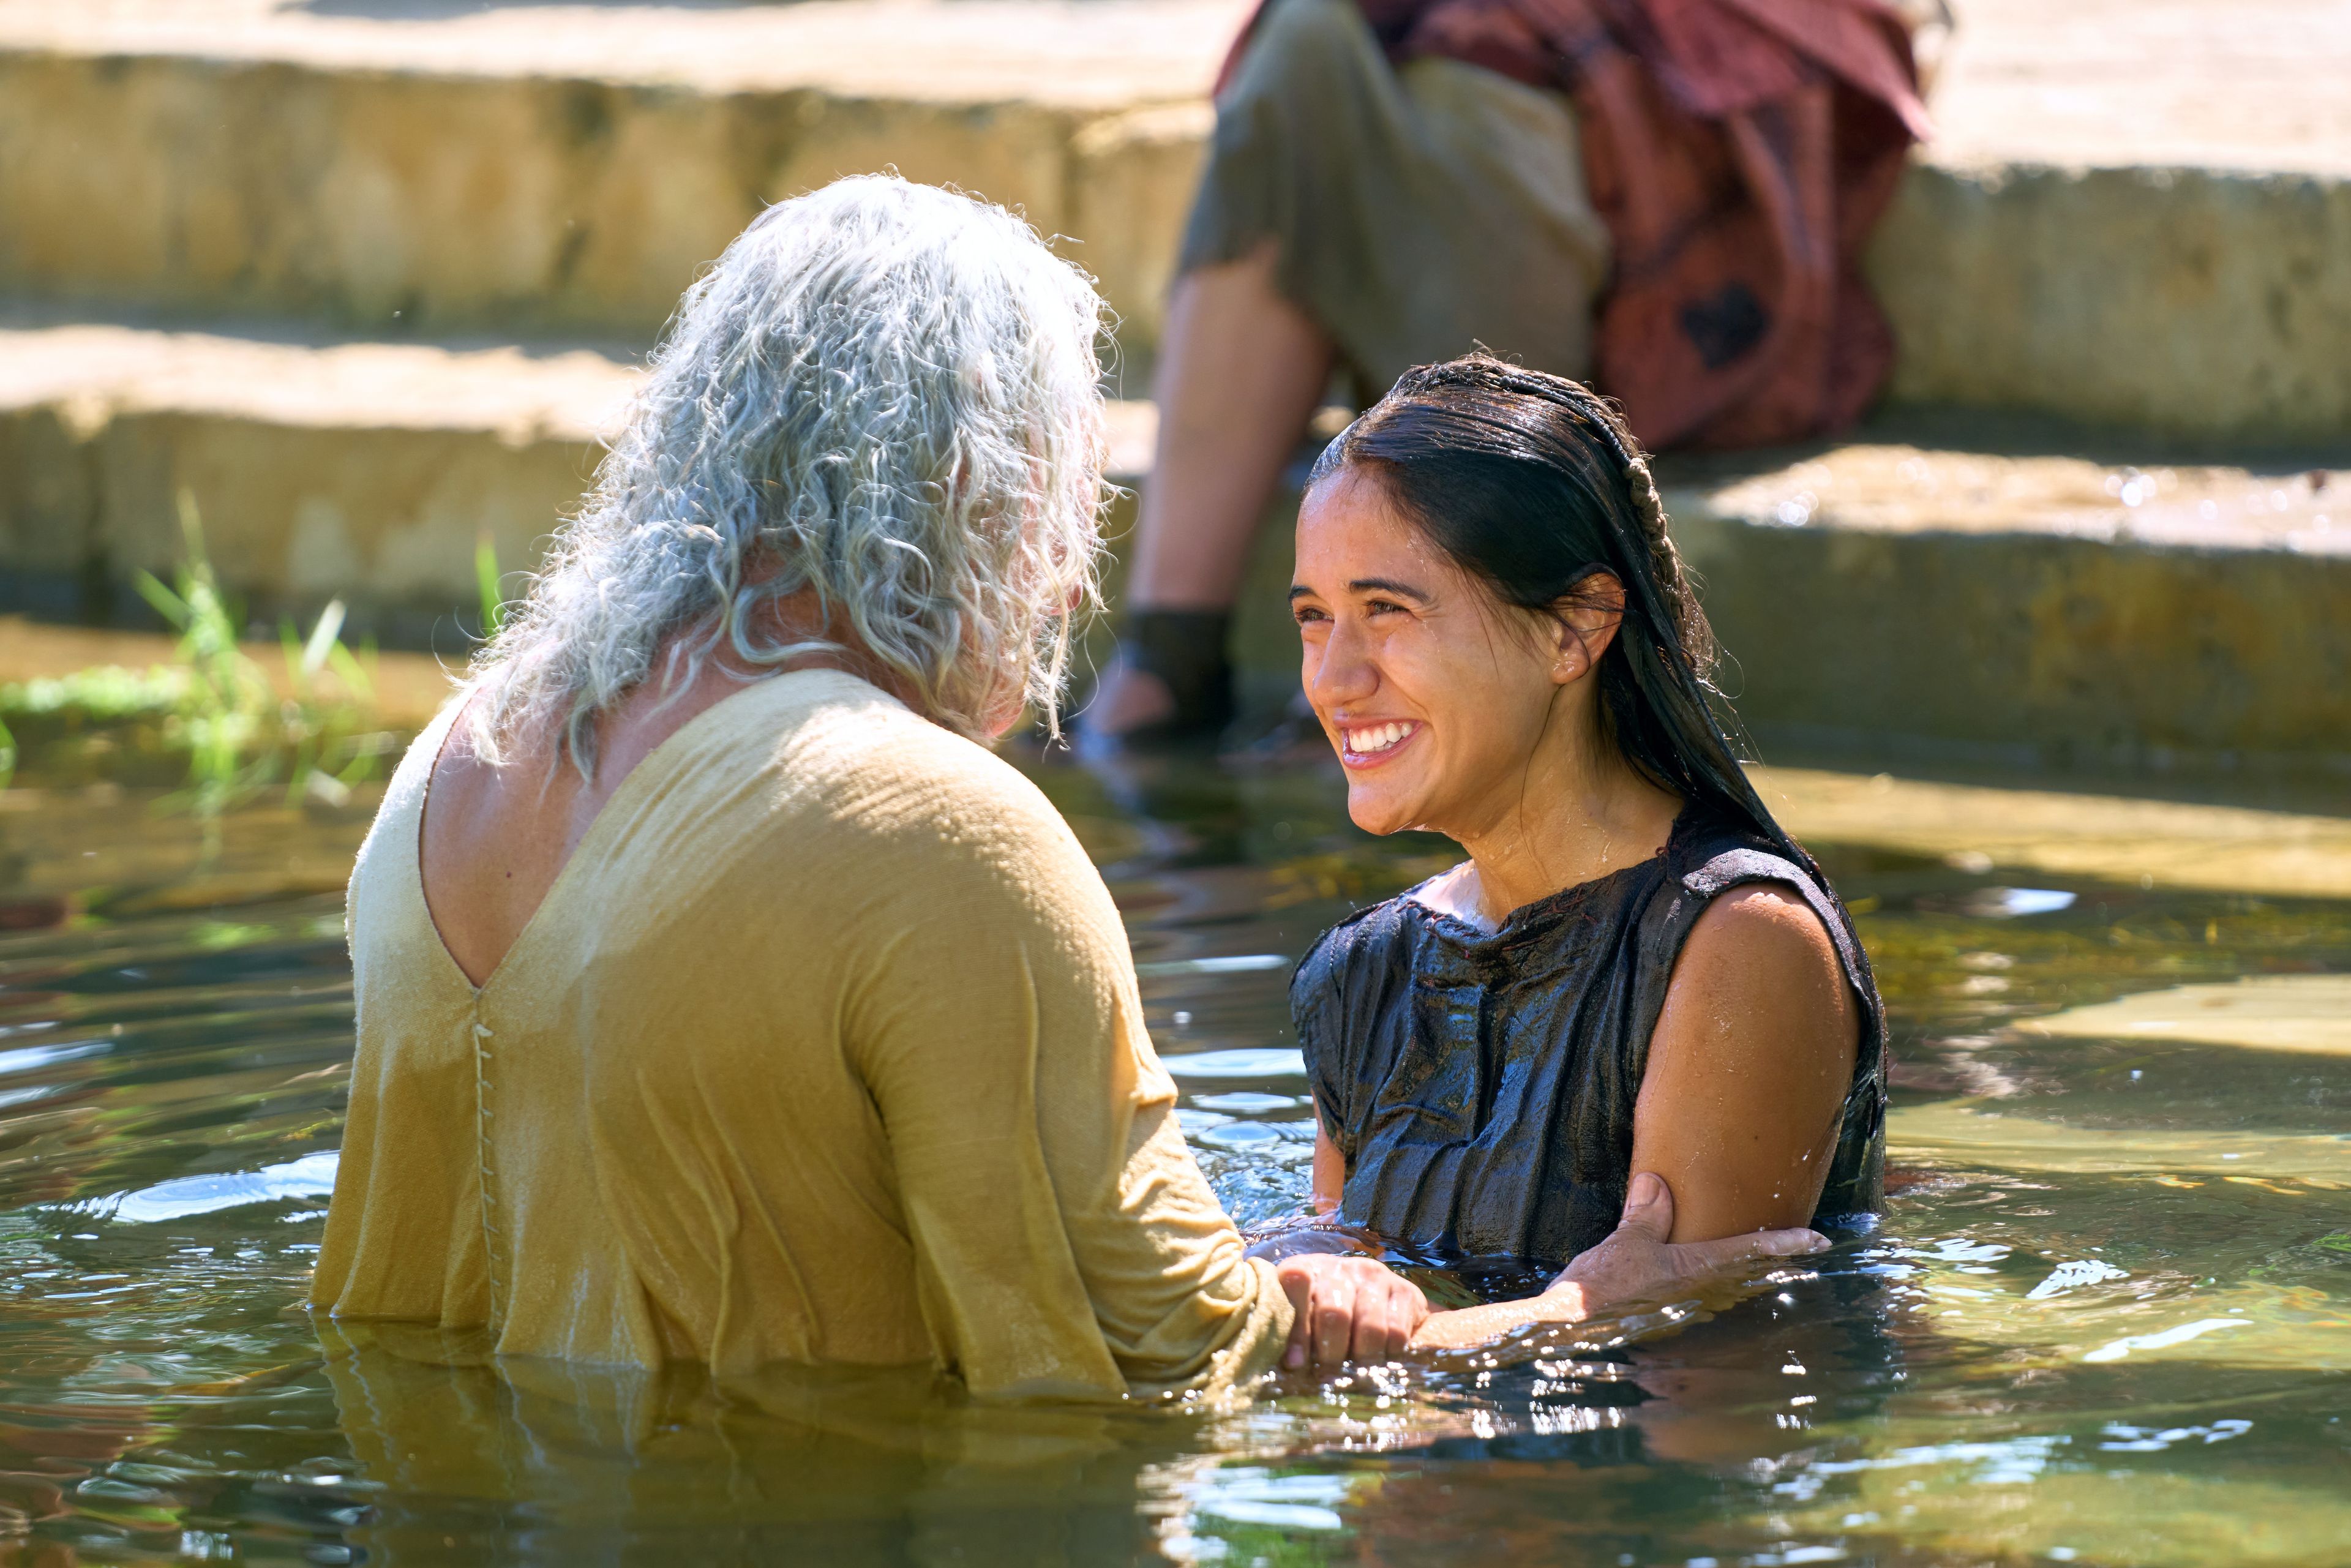 Nephi baptizes a woman while others watch. He had previously been set apart and given the authority by the resurrected Savior, Jesus Christ.